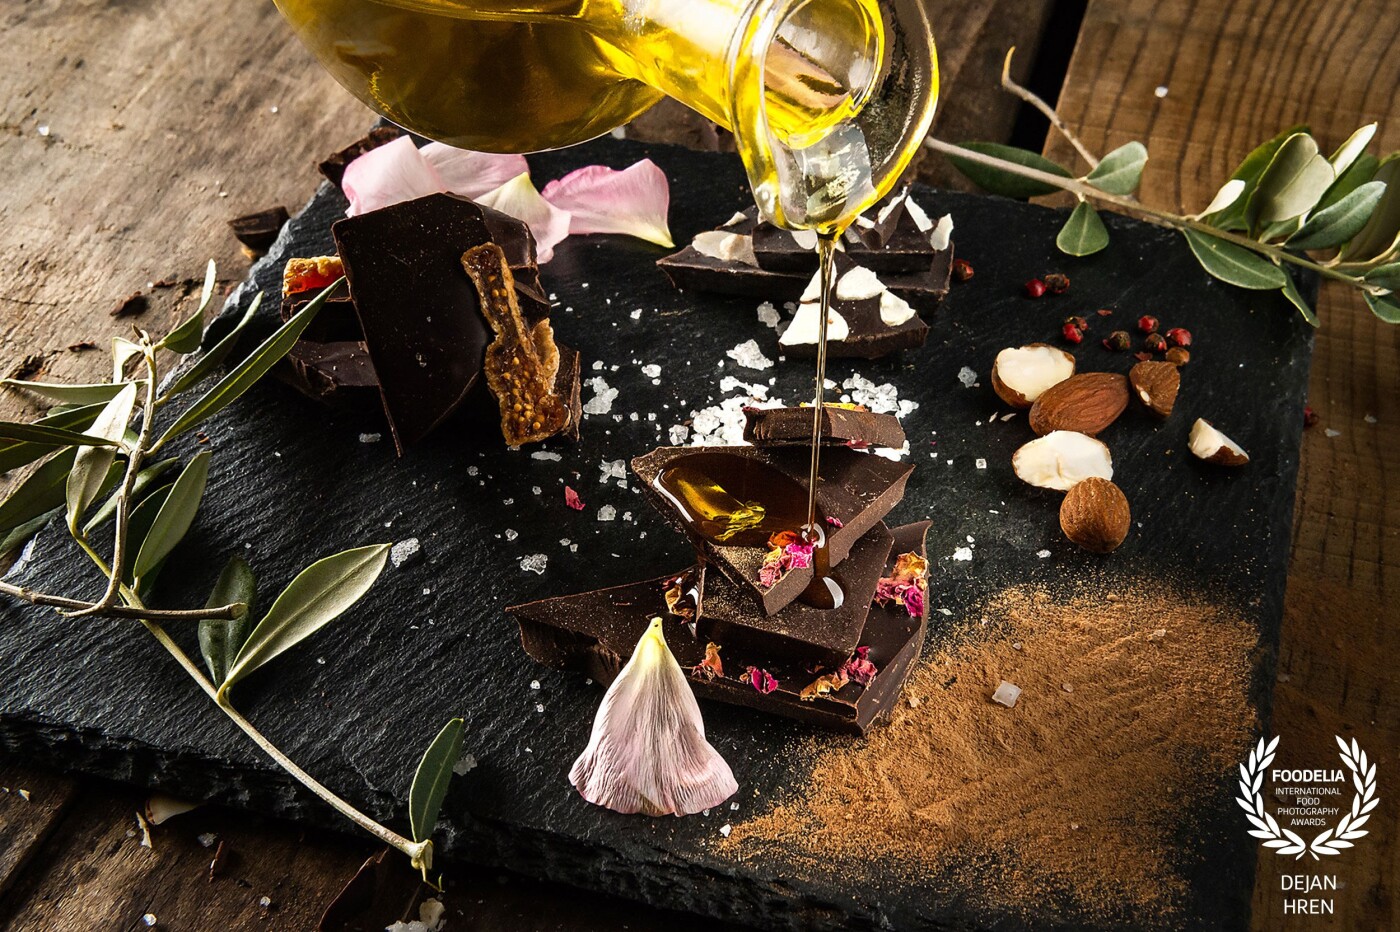 Chocolate photoshoot for a local choco brand from Croatia. The main focus was on the details of the ingredients and on the quantity of the chocolate mixture.